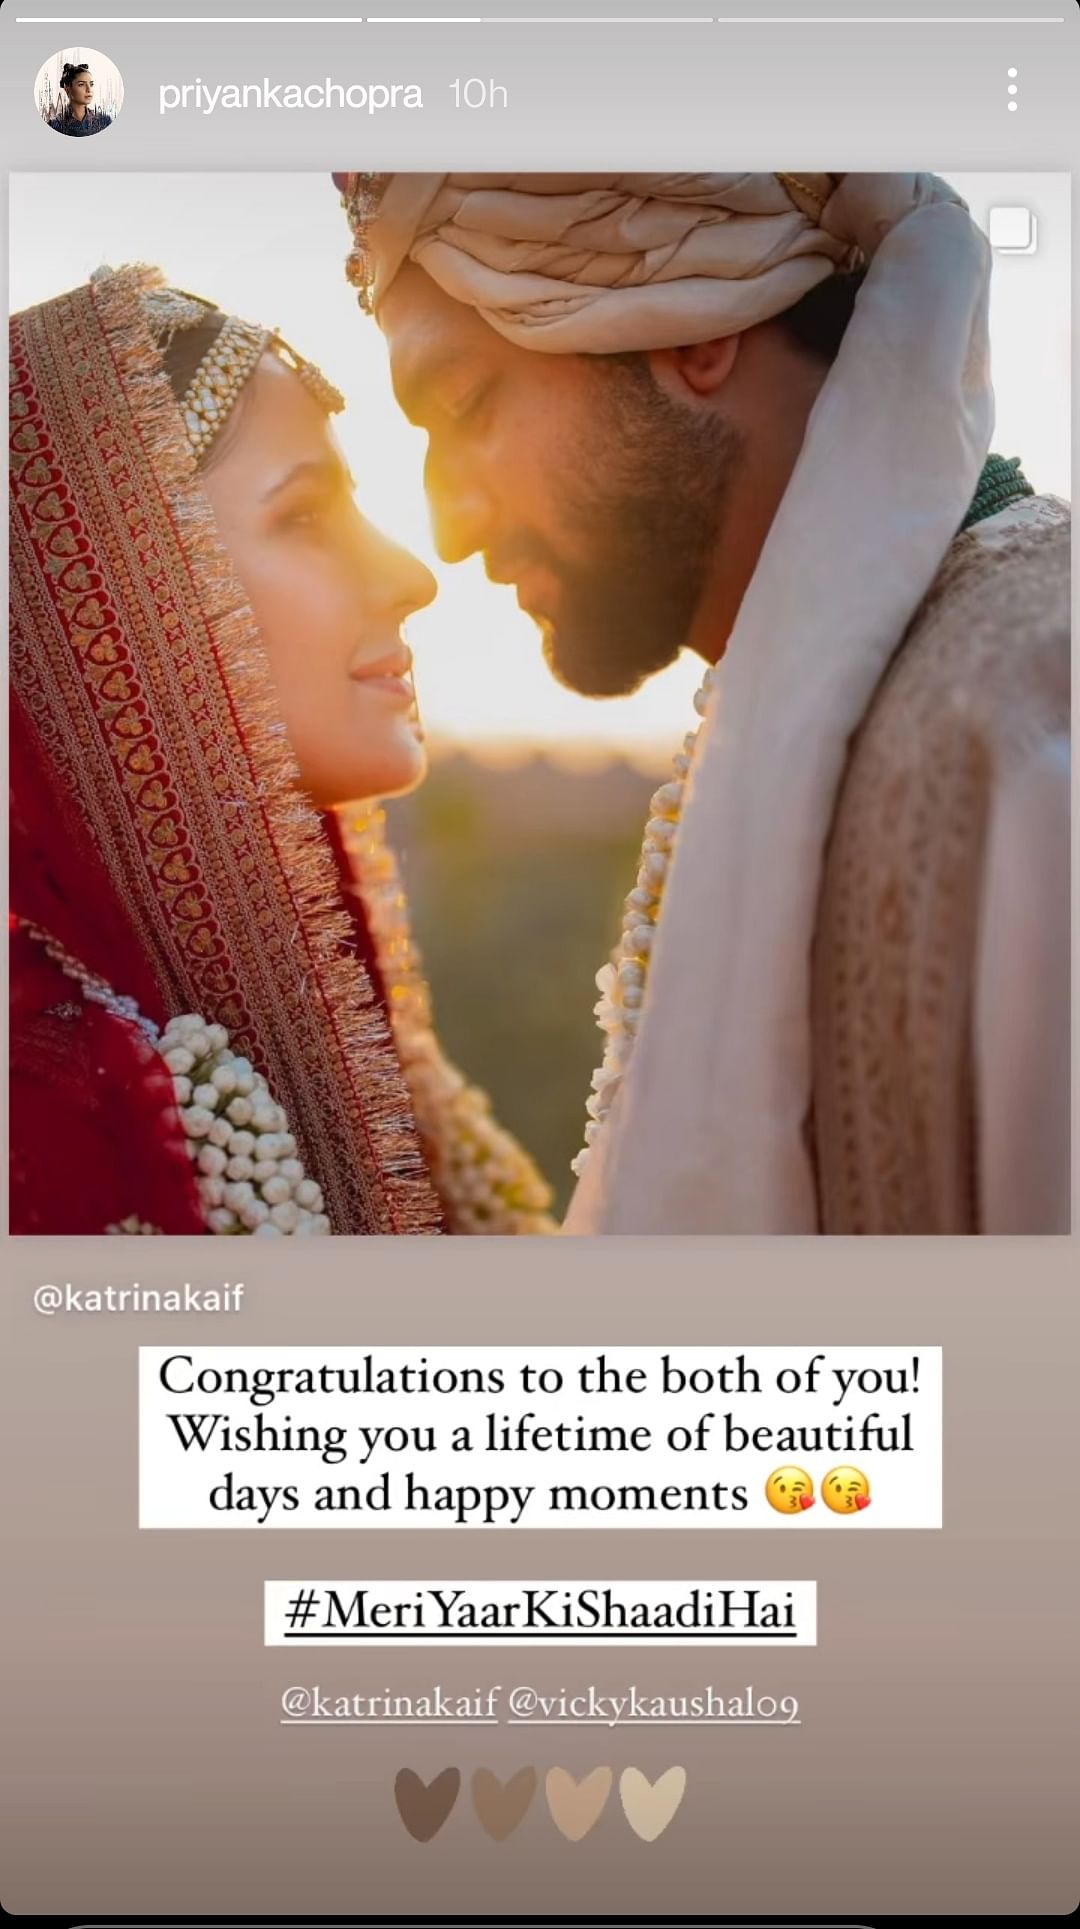 'Here’s raising a toast to the most gorgeous couple I know,' Neha Dhupia wished Katrina and Vicky.